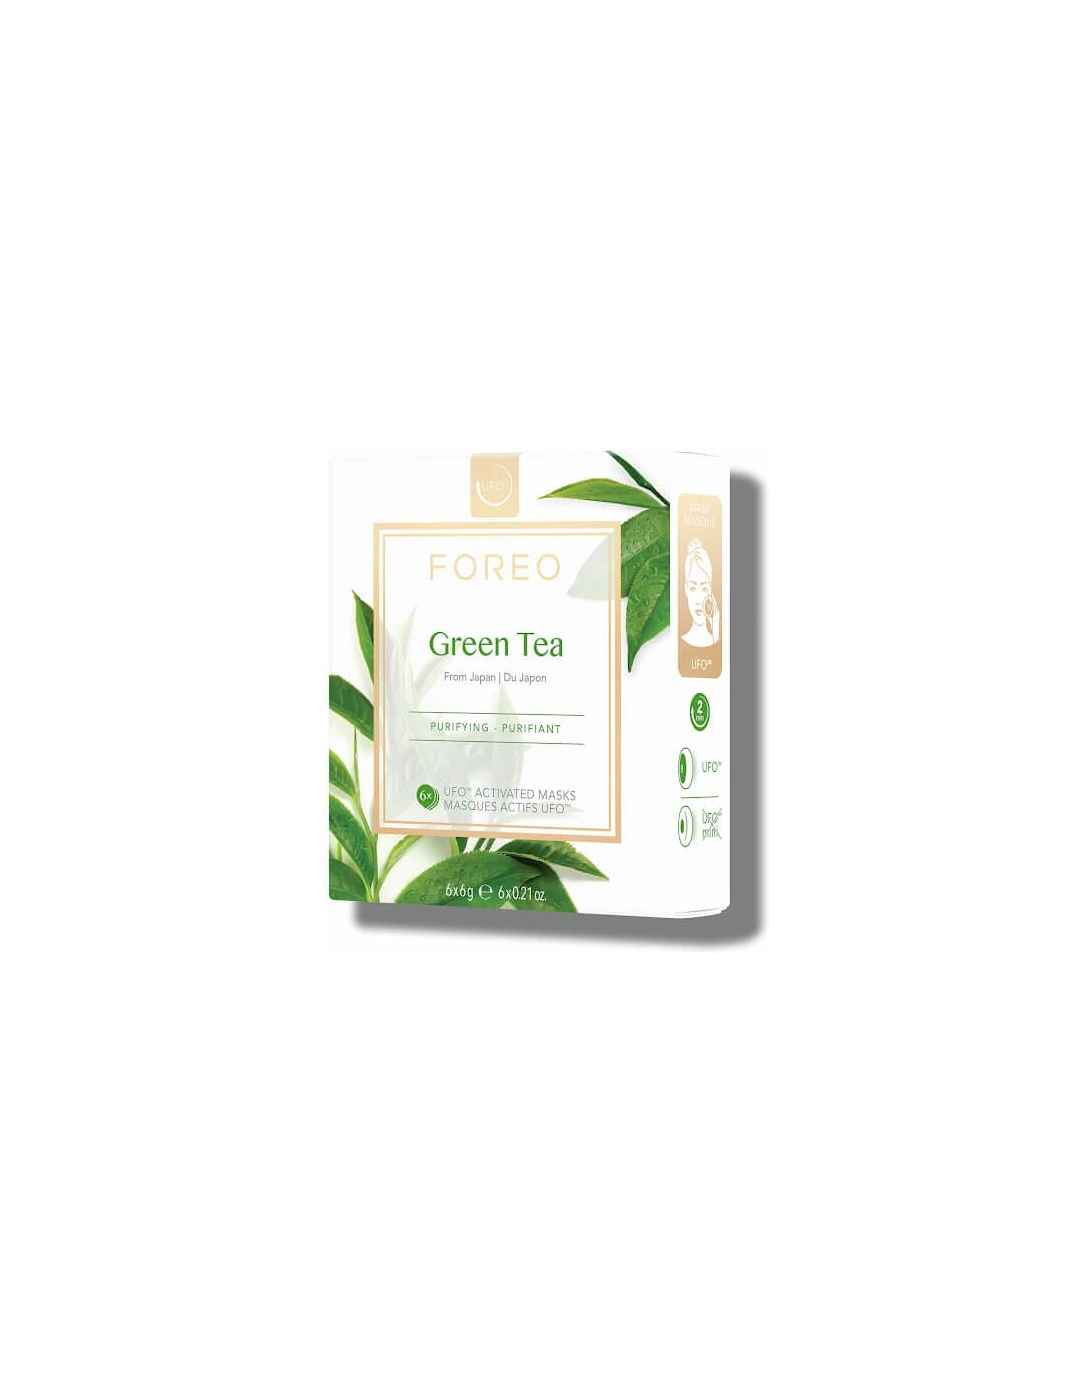 Green Tea UFO Purifying Face Mask (6 Pack) - - Green Tea UFO Purifying Face Mask (6 Pack) - Amelia - Green Tea UFO Purifying Face Mask (6 Pack) - Alexandra - Green Tea UFO Purifying Face Mask (6 Pack) - Courtney - Green Tea UFO Purifying Face Mask (6 Pack) - Zoey, 2 of 1